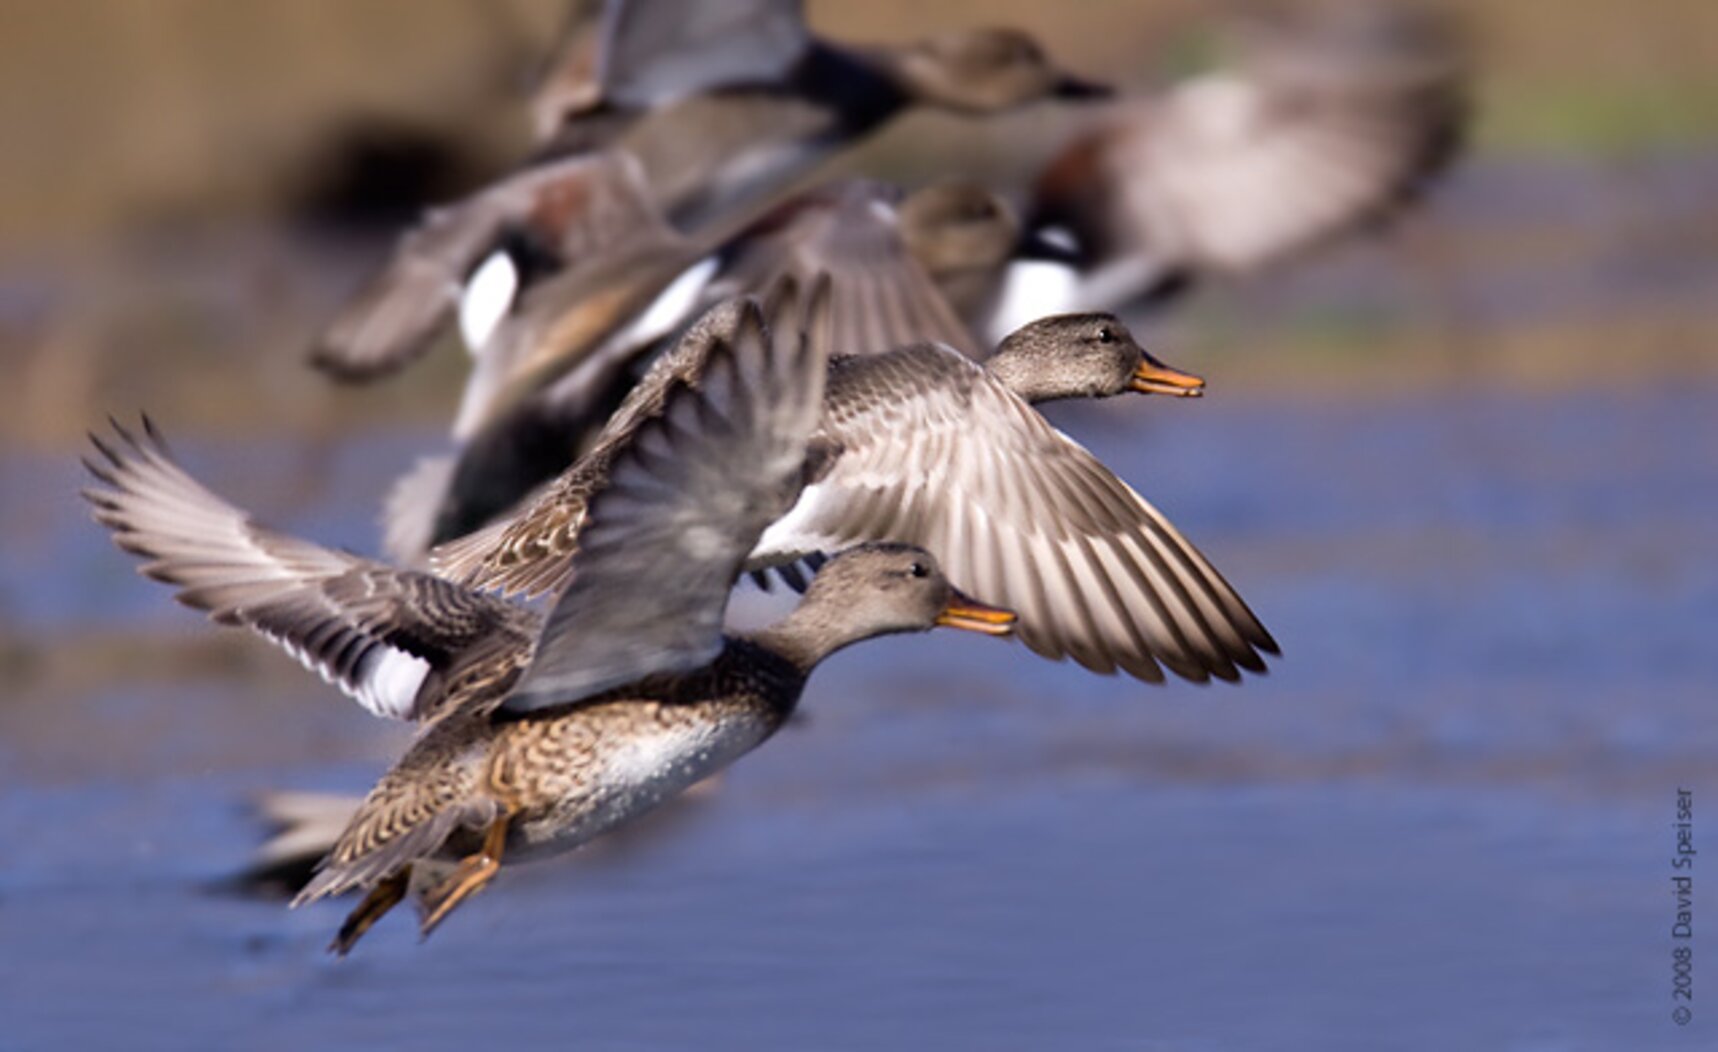 Gadwall, easily identifed in flight by the white patch on their secondary feathers, are year-round residents at Goethals Pond. Photo: David Speiser